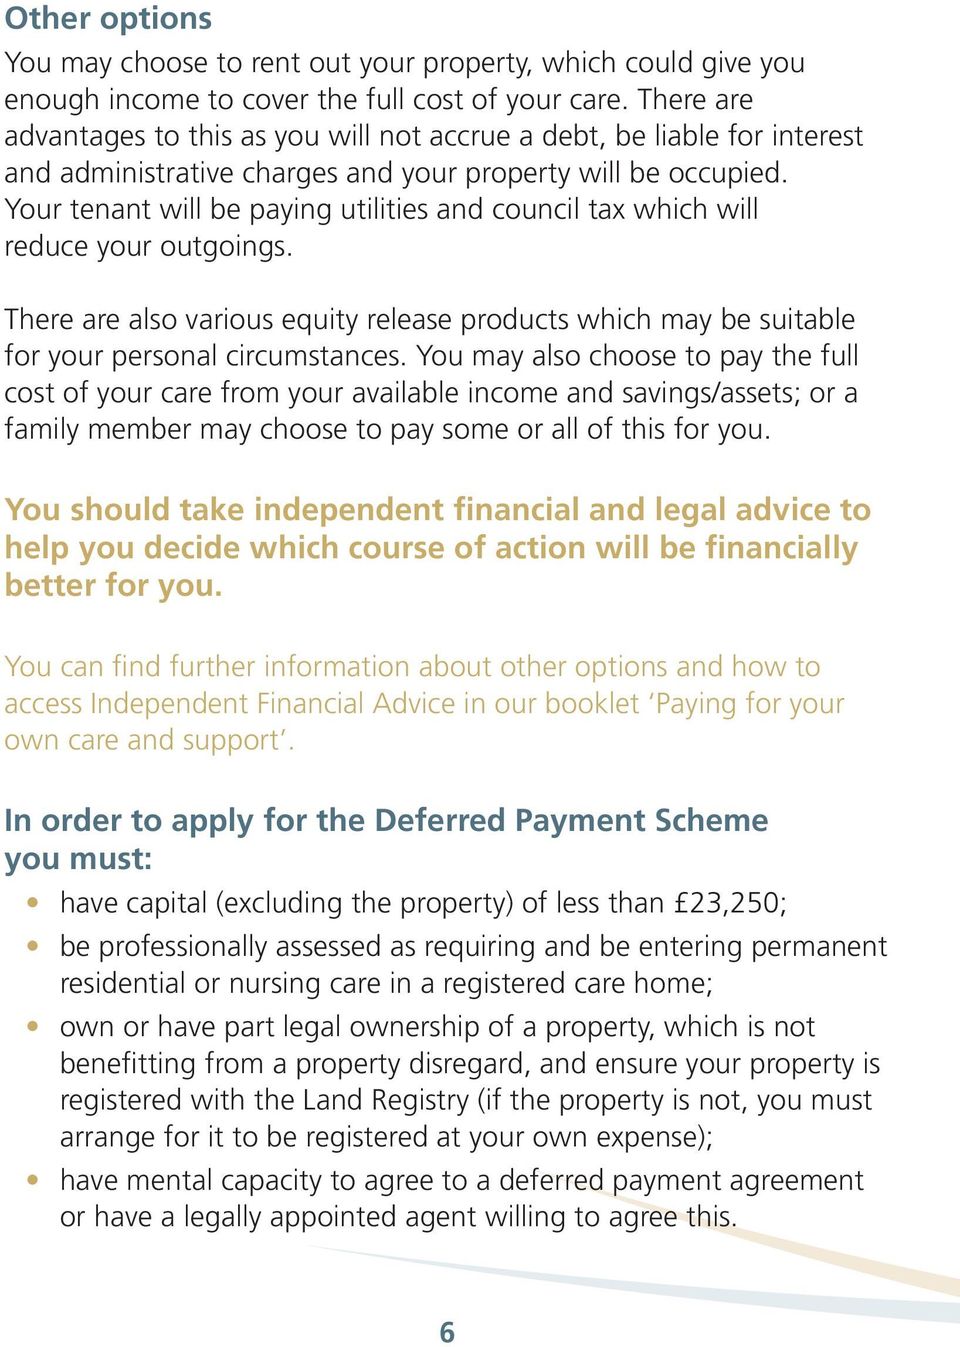 Your tenant will be paying utilities and council tax which will reduce your outgoings. There are also various equity release products which may be suitable for your personal circumstances.